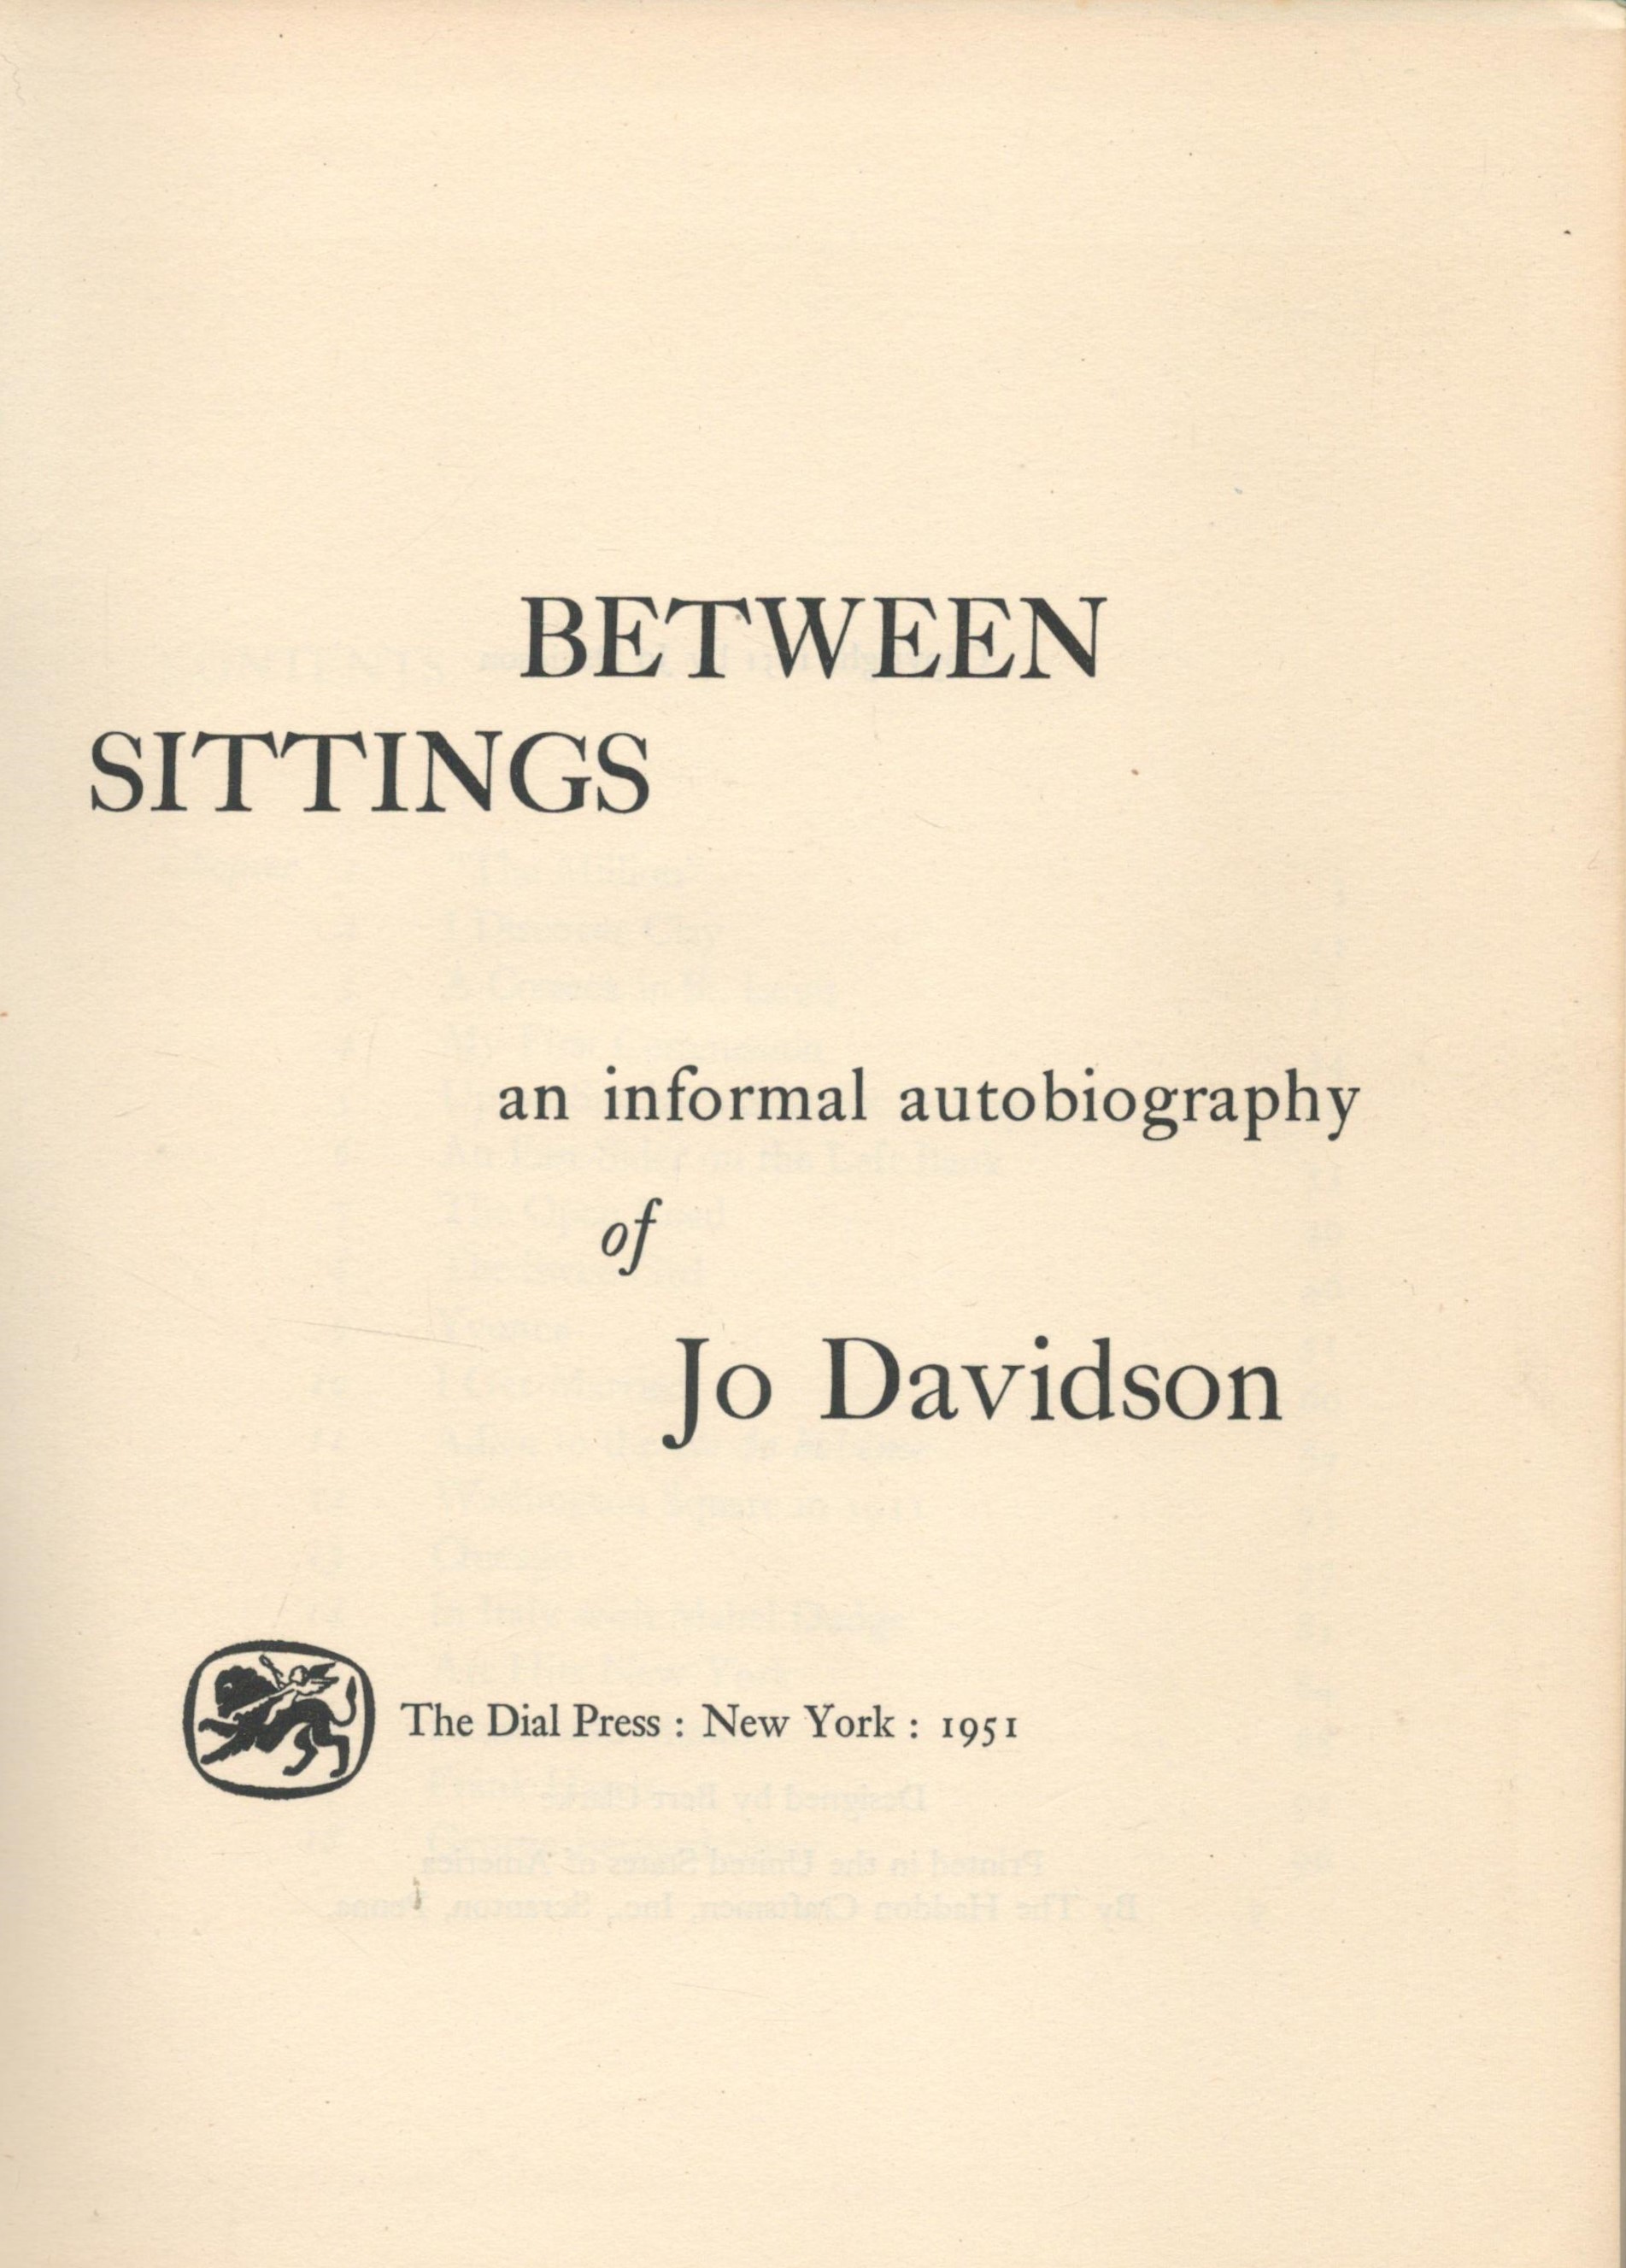 Between Sittings An Informal Autobiography of Jo Davidson 1951 First Edition Hardback Book with - Image 2 of 3